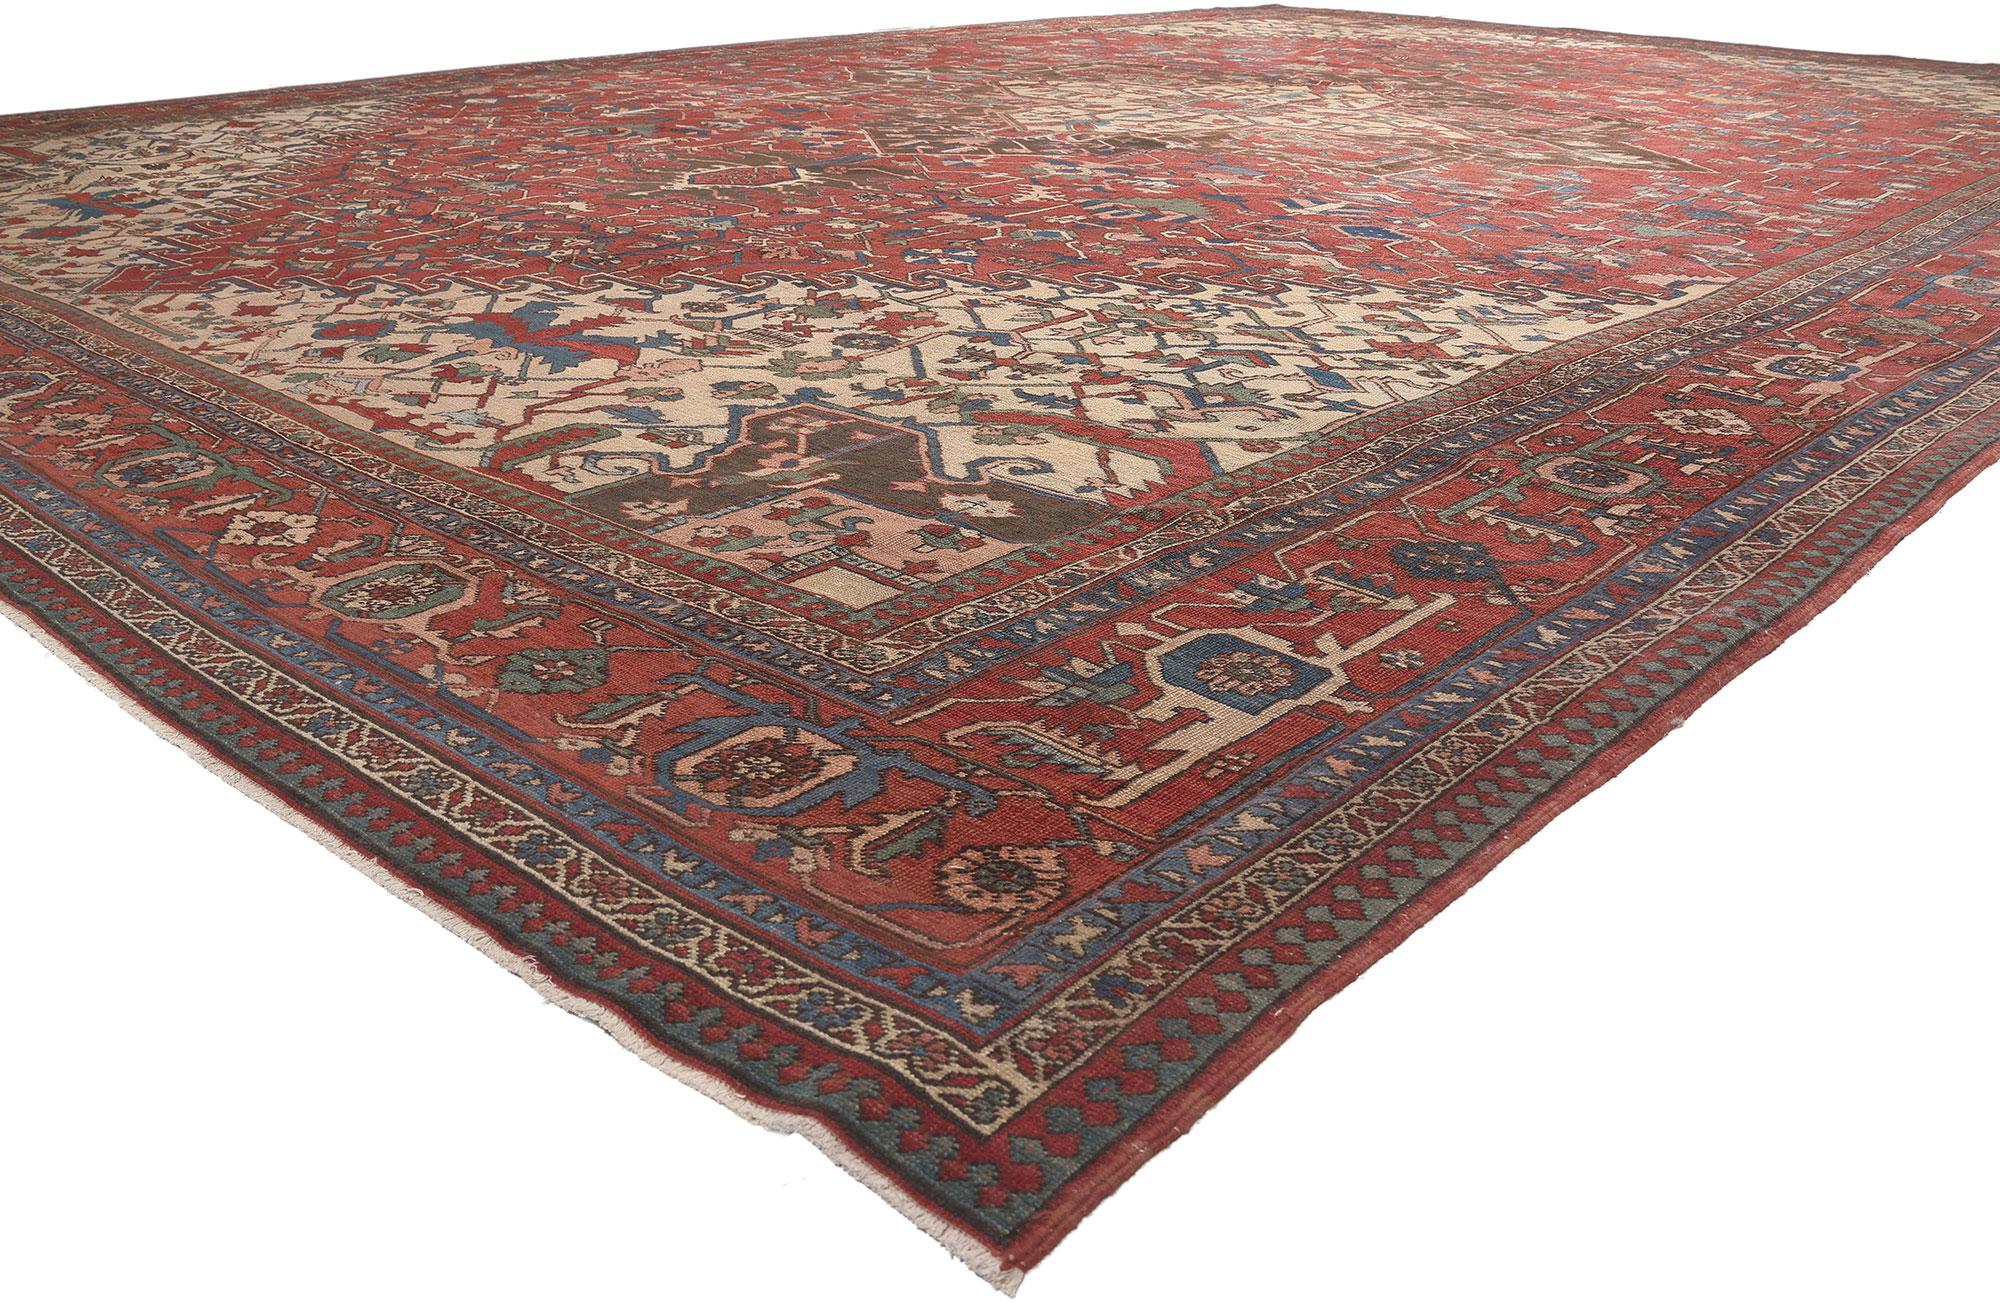 77525 Oversized Antique Persian Serapi Rug 16'00 x 24'01.
Warm and inviting with a timeless style, this oversized antique Persian Serapi rug charms with ease. The striking geometric design and refined color palette woven into this piece work